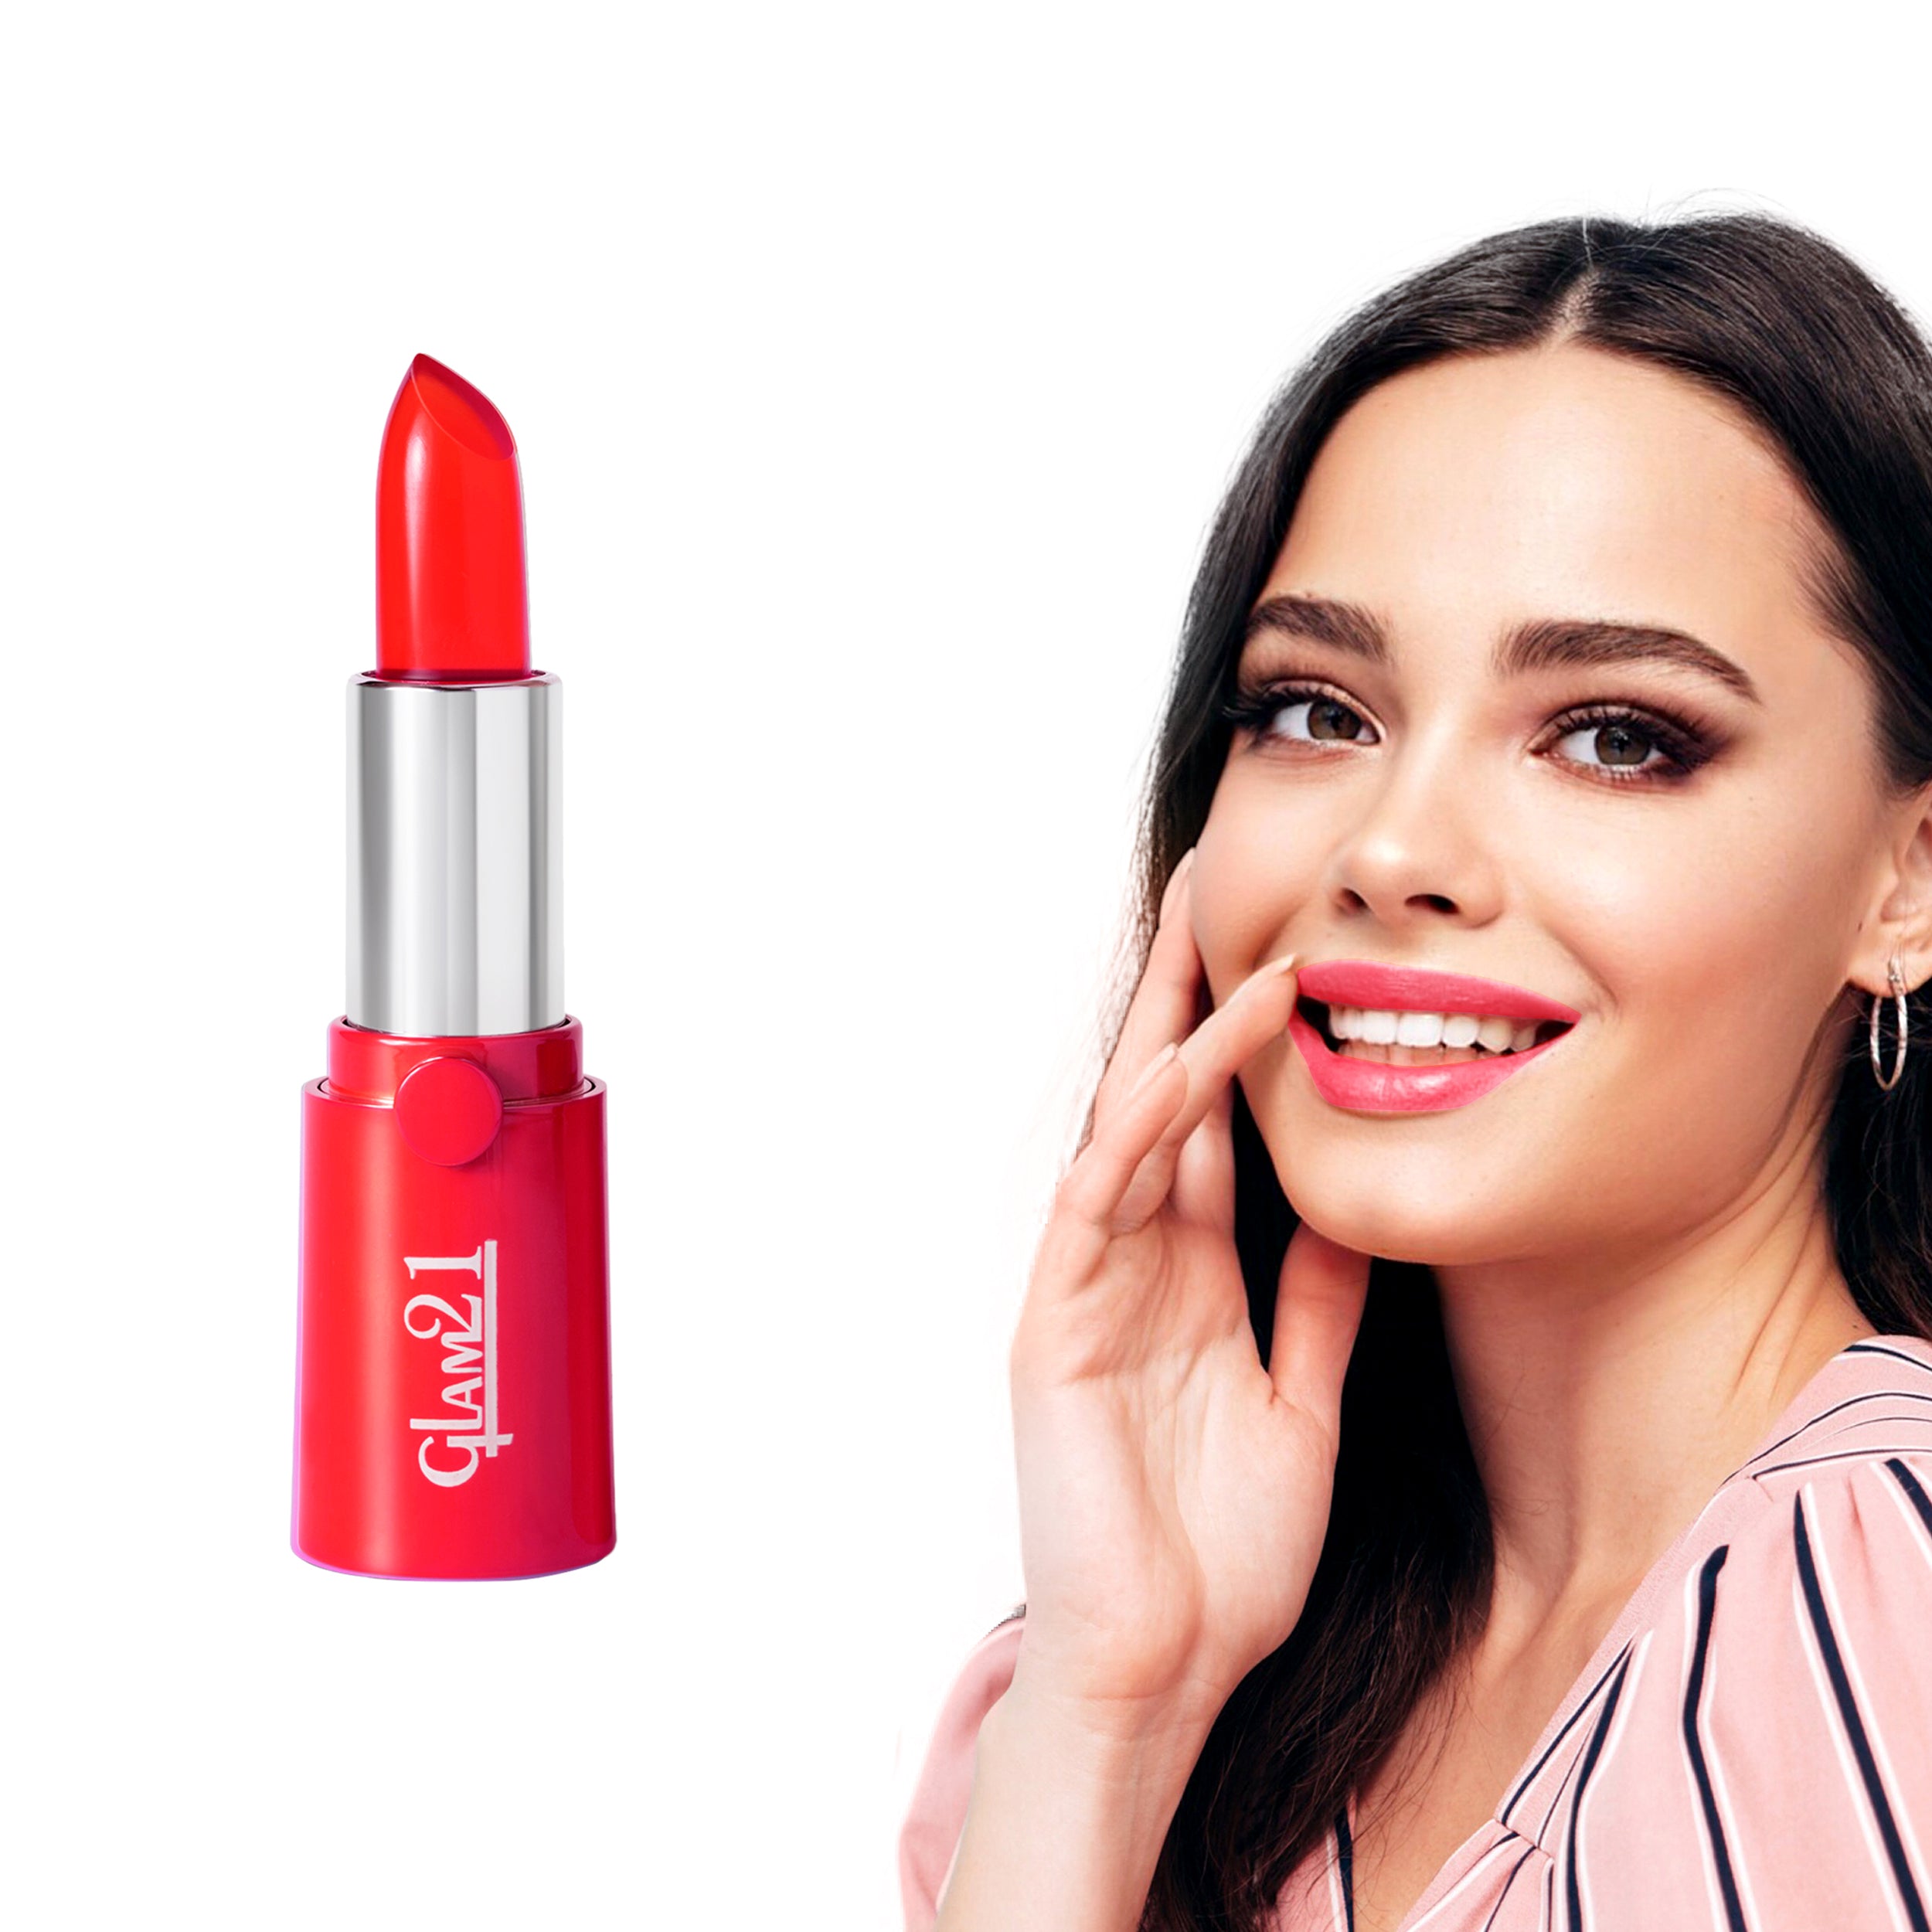 Glam21 Gel Based Ultra-Moisturizing Lightweighted Lipstick with Glossy Shine Formula (Flame Red, 3.6 g)